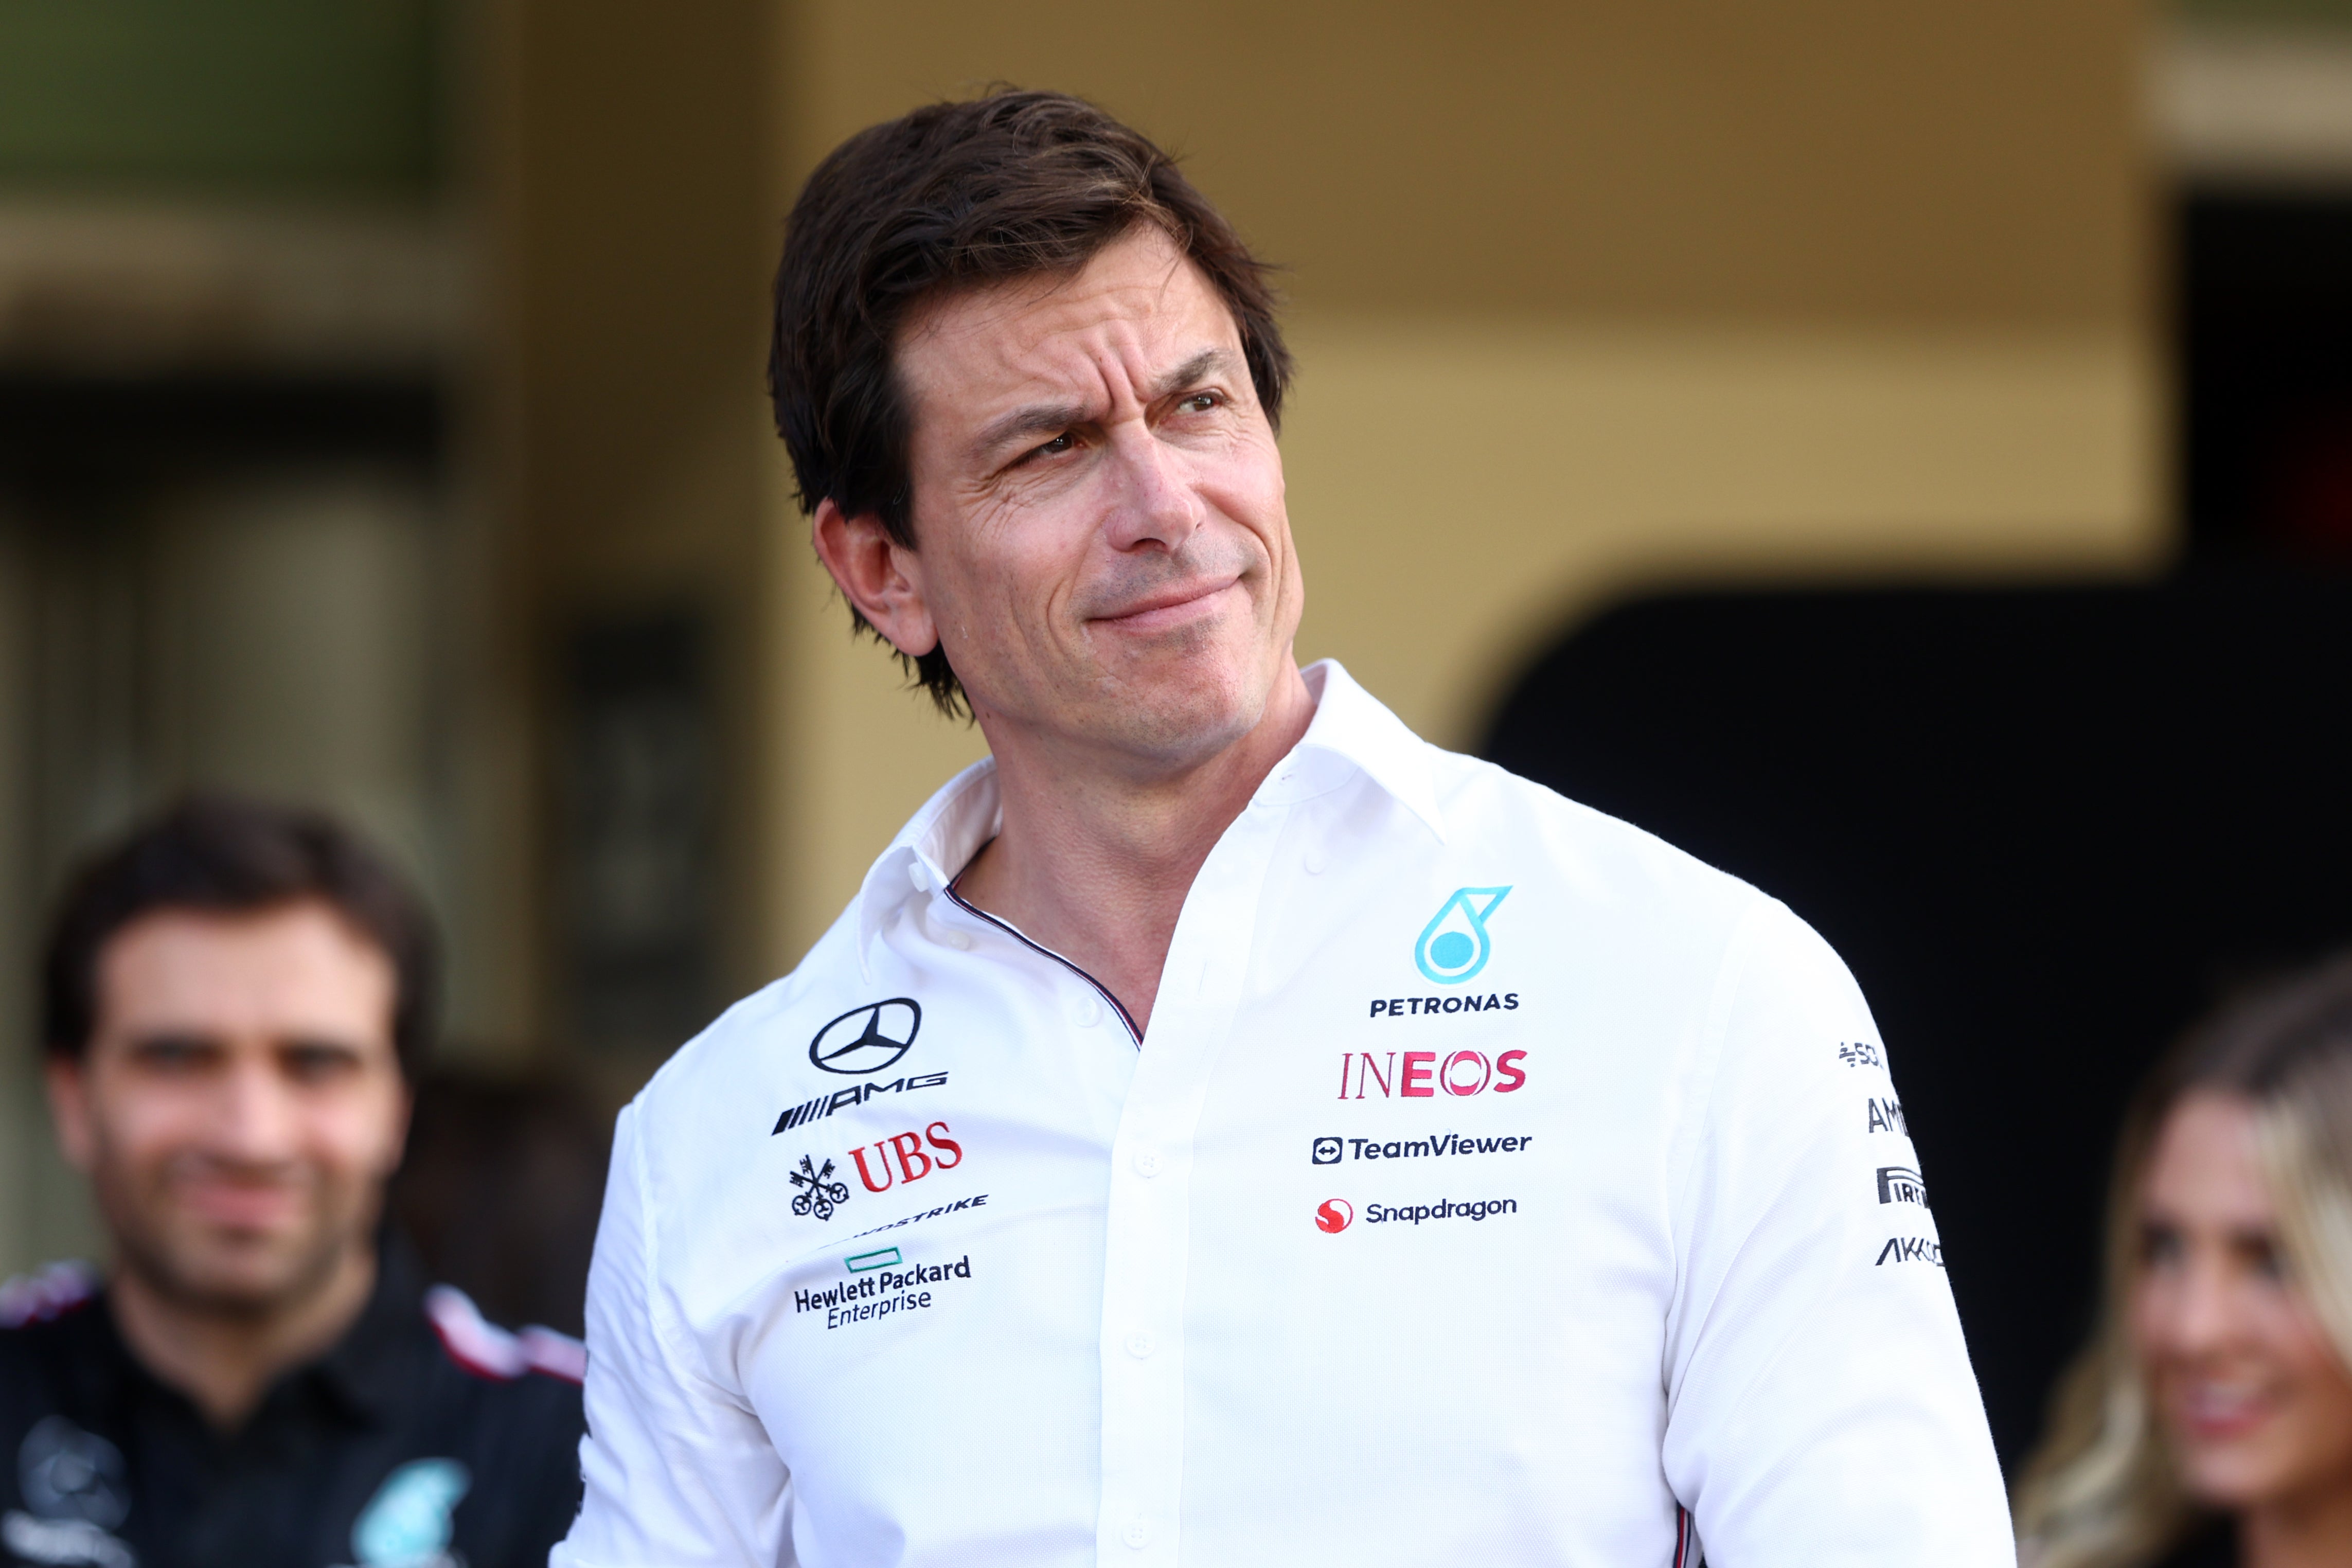 Toto Wolff has reportedly signed a new three-year contract with Mercedes